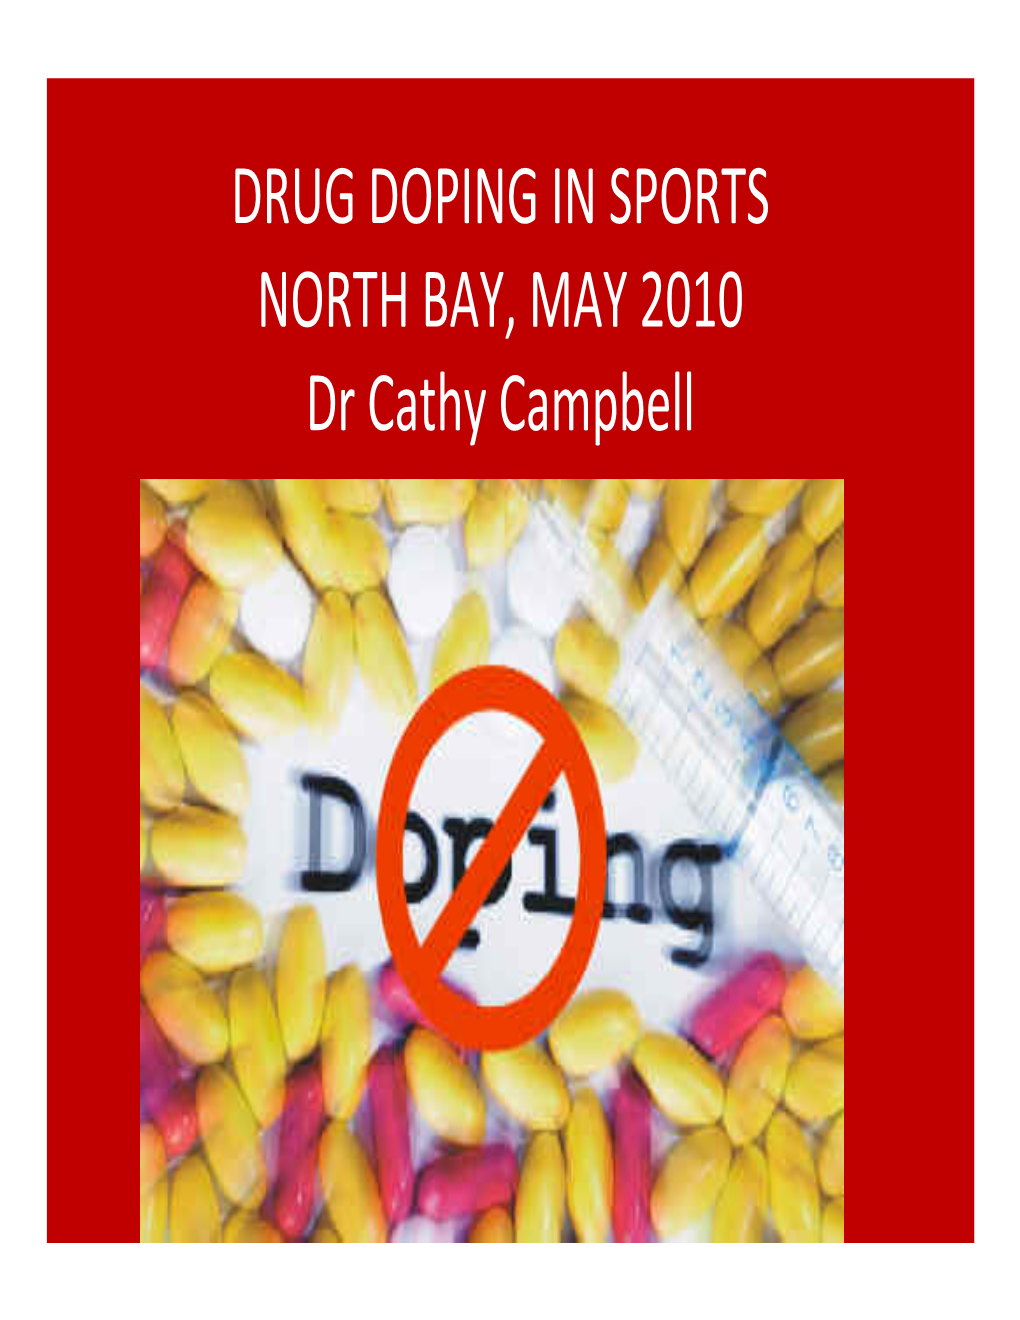 DRUG DOPING in SPORTS NORTH BAY, MAY 2010 Dr Cathy Campbell AGENDA